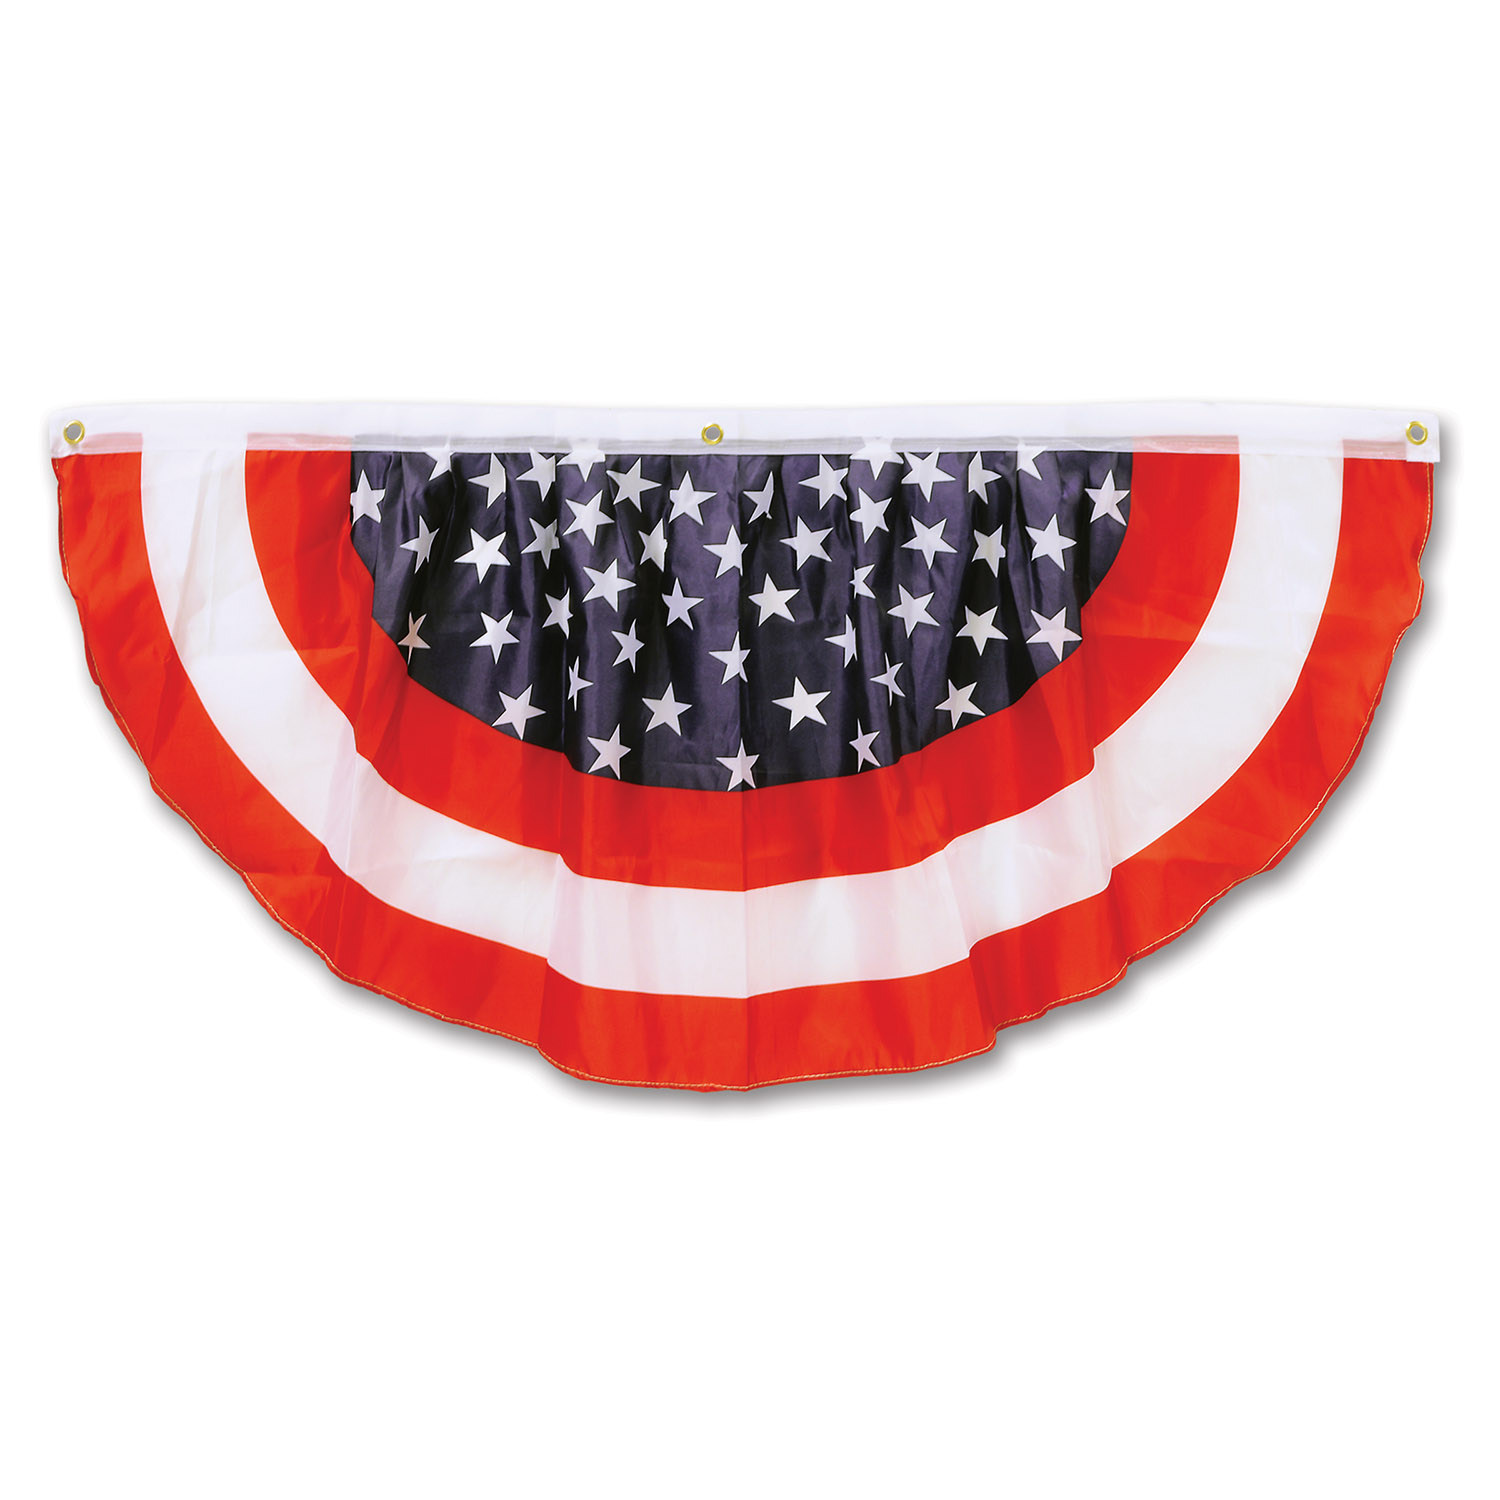 fabric bunting that looks like an American flag